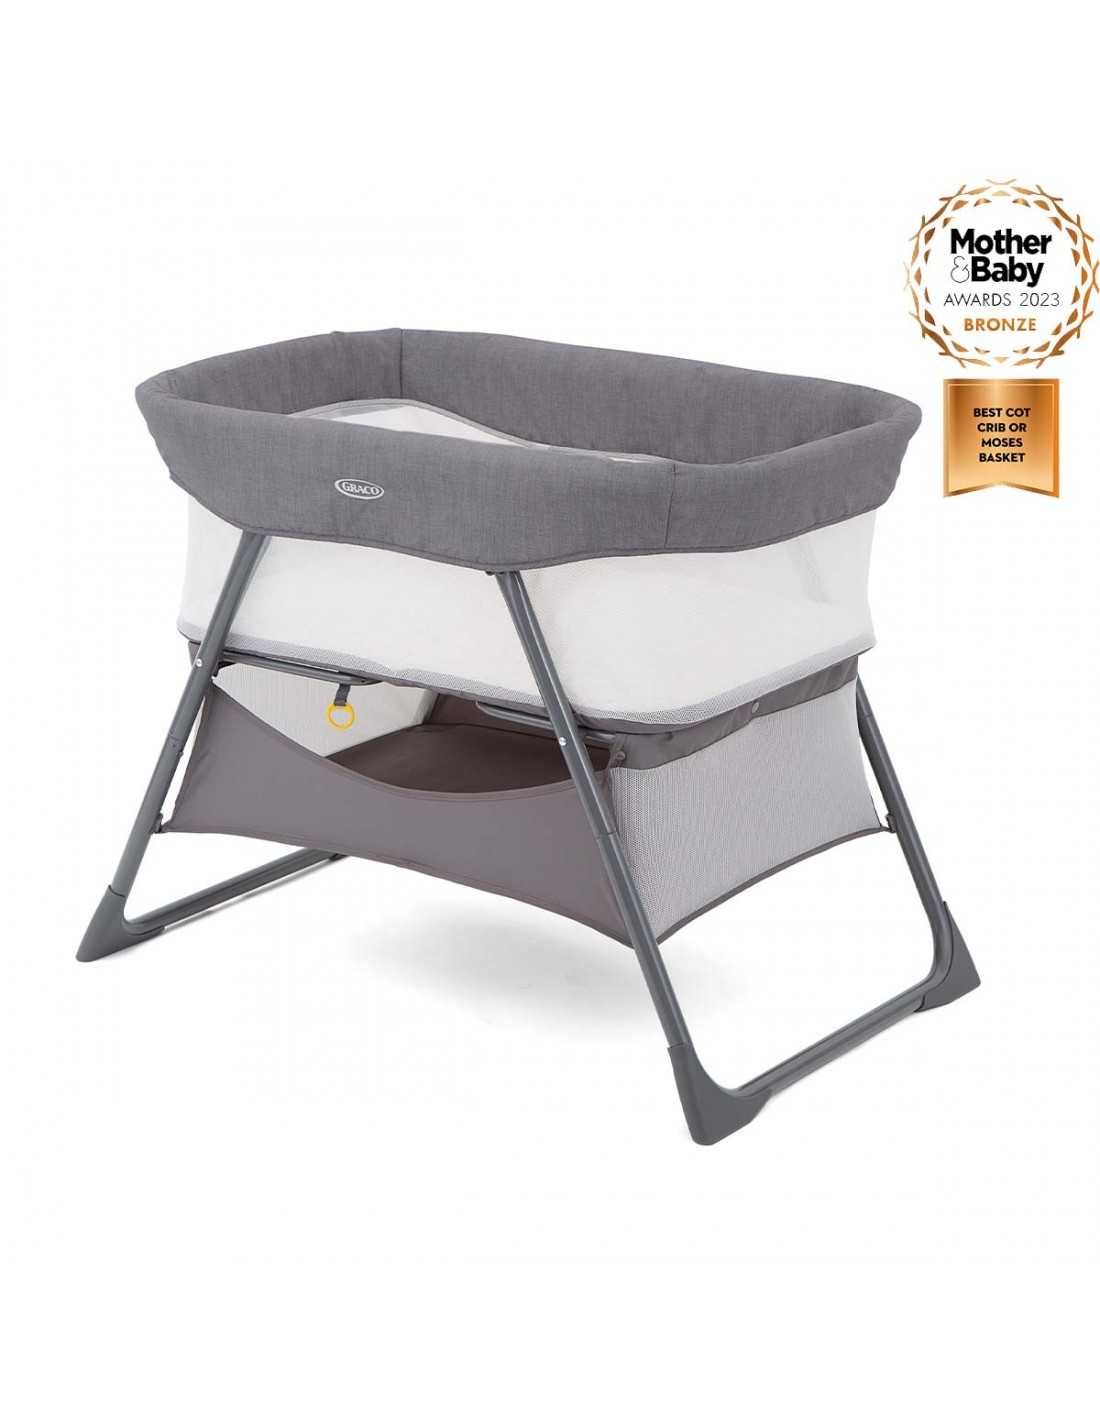 Graco Contour Bassinet Travel Cot, Birth to 3 years